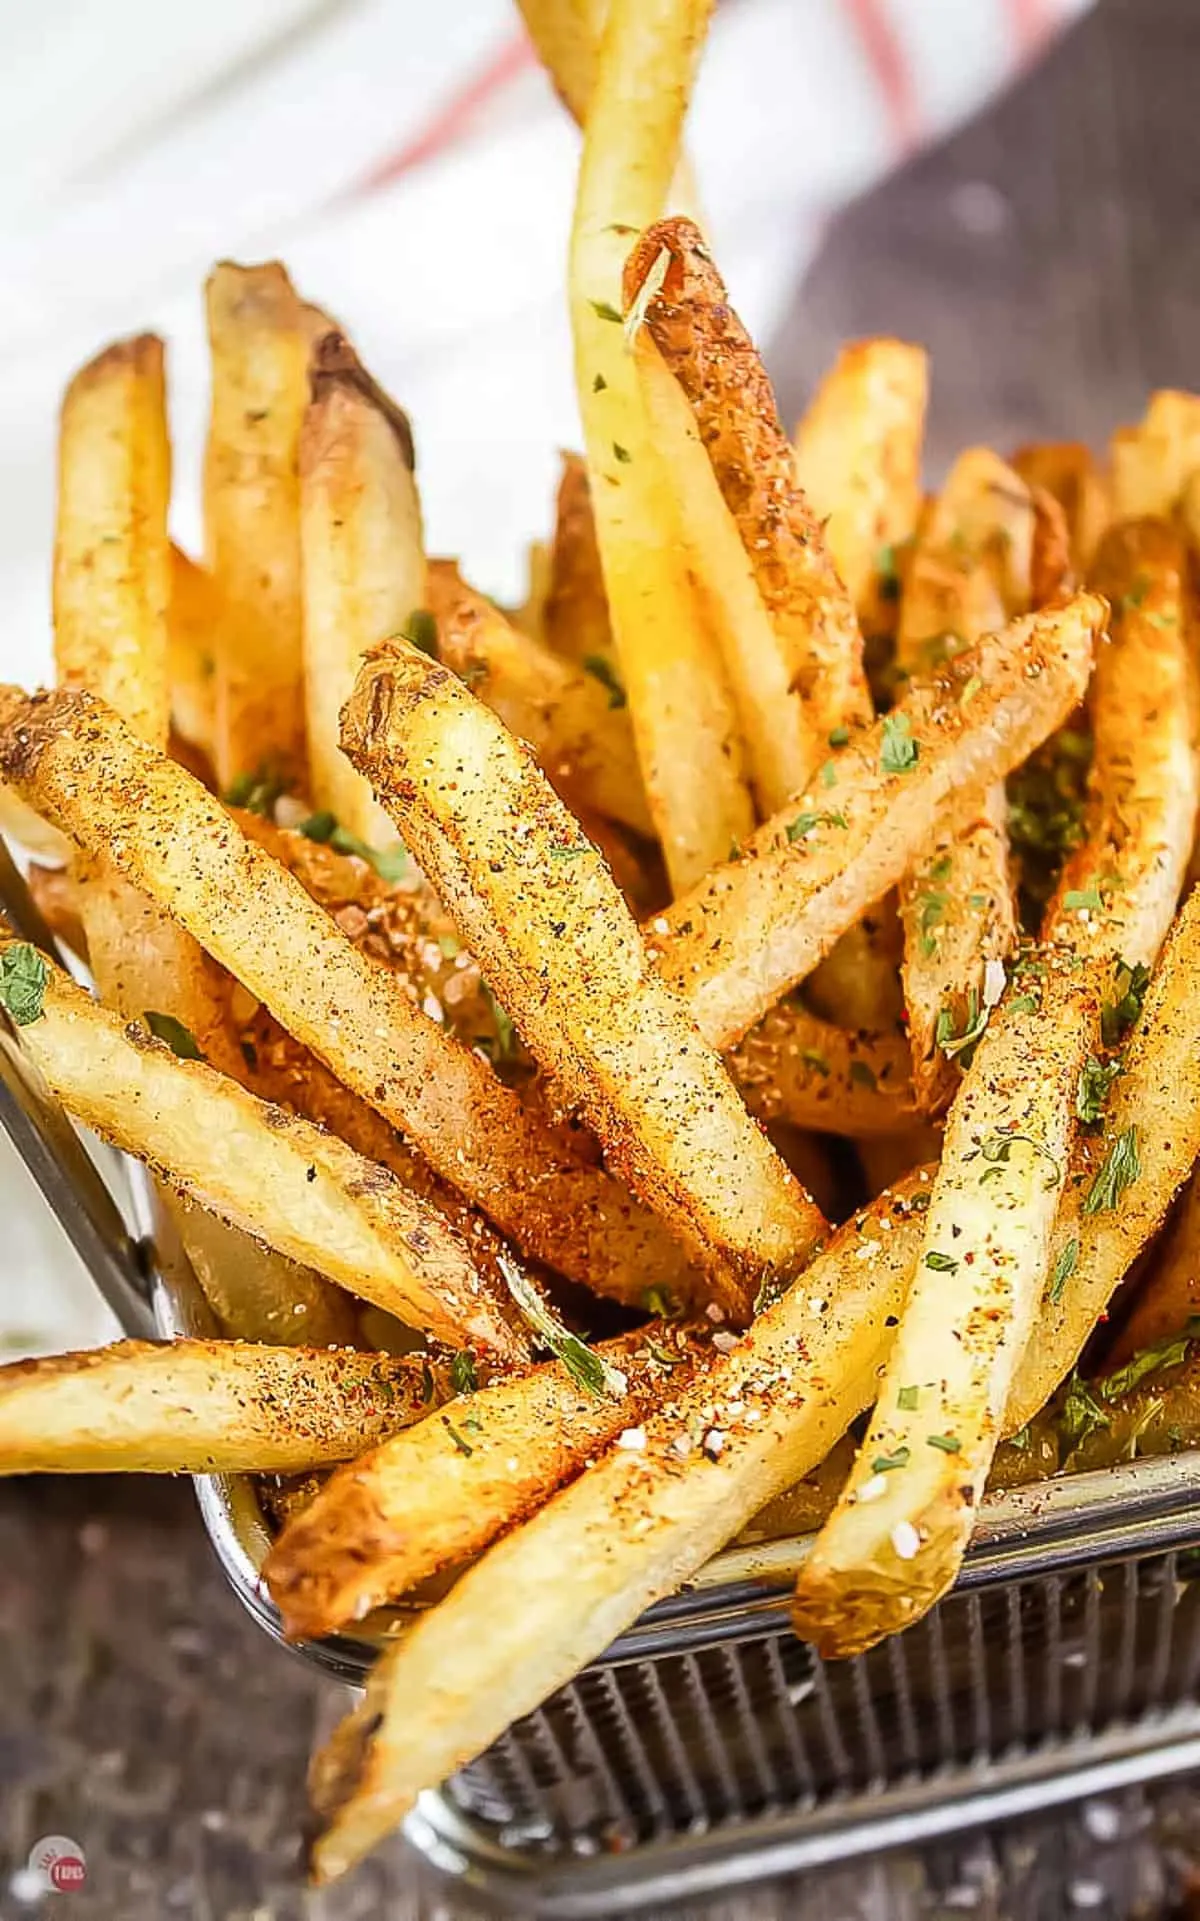 wire basket of fries with seasoning on them